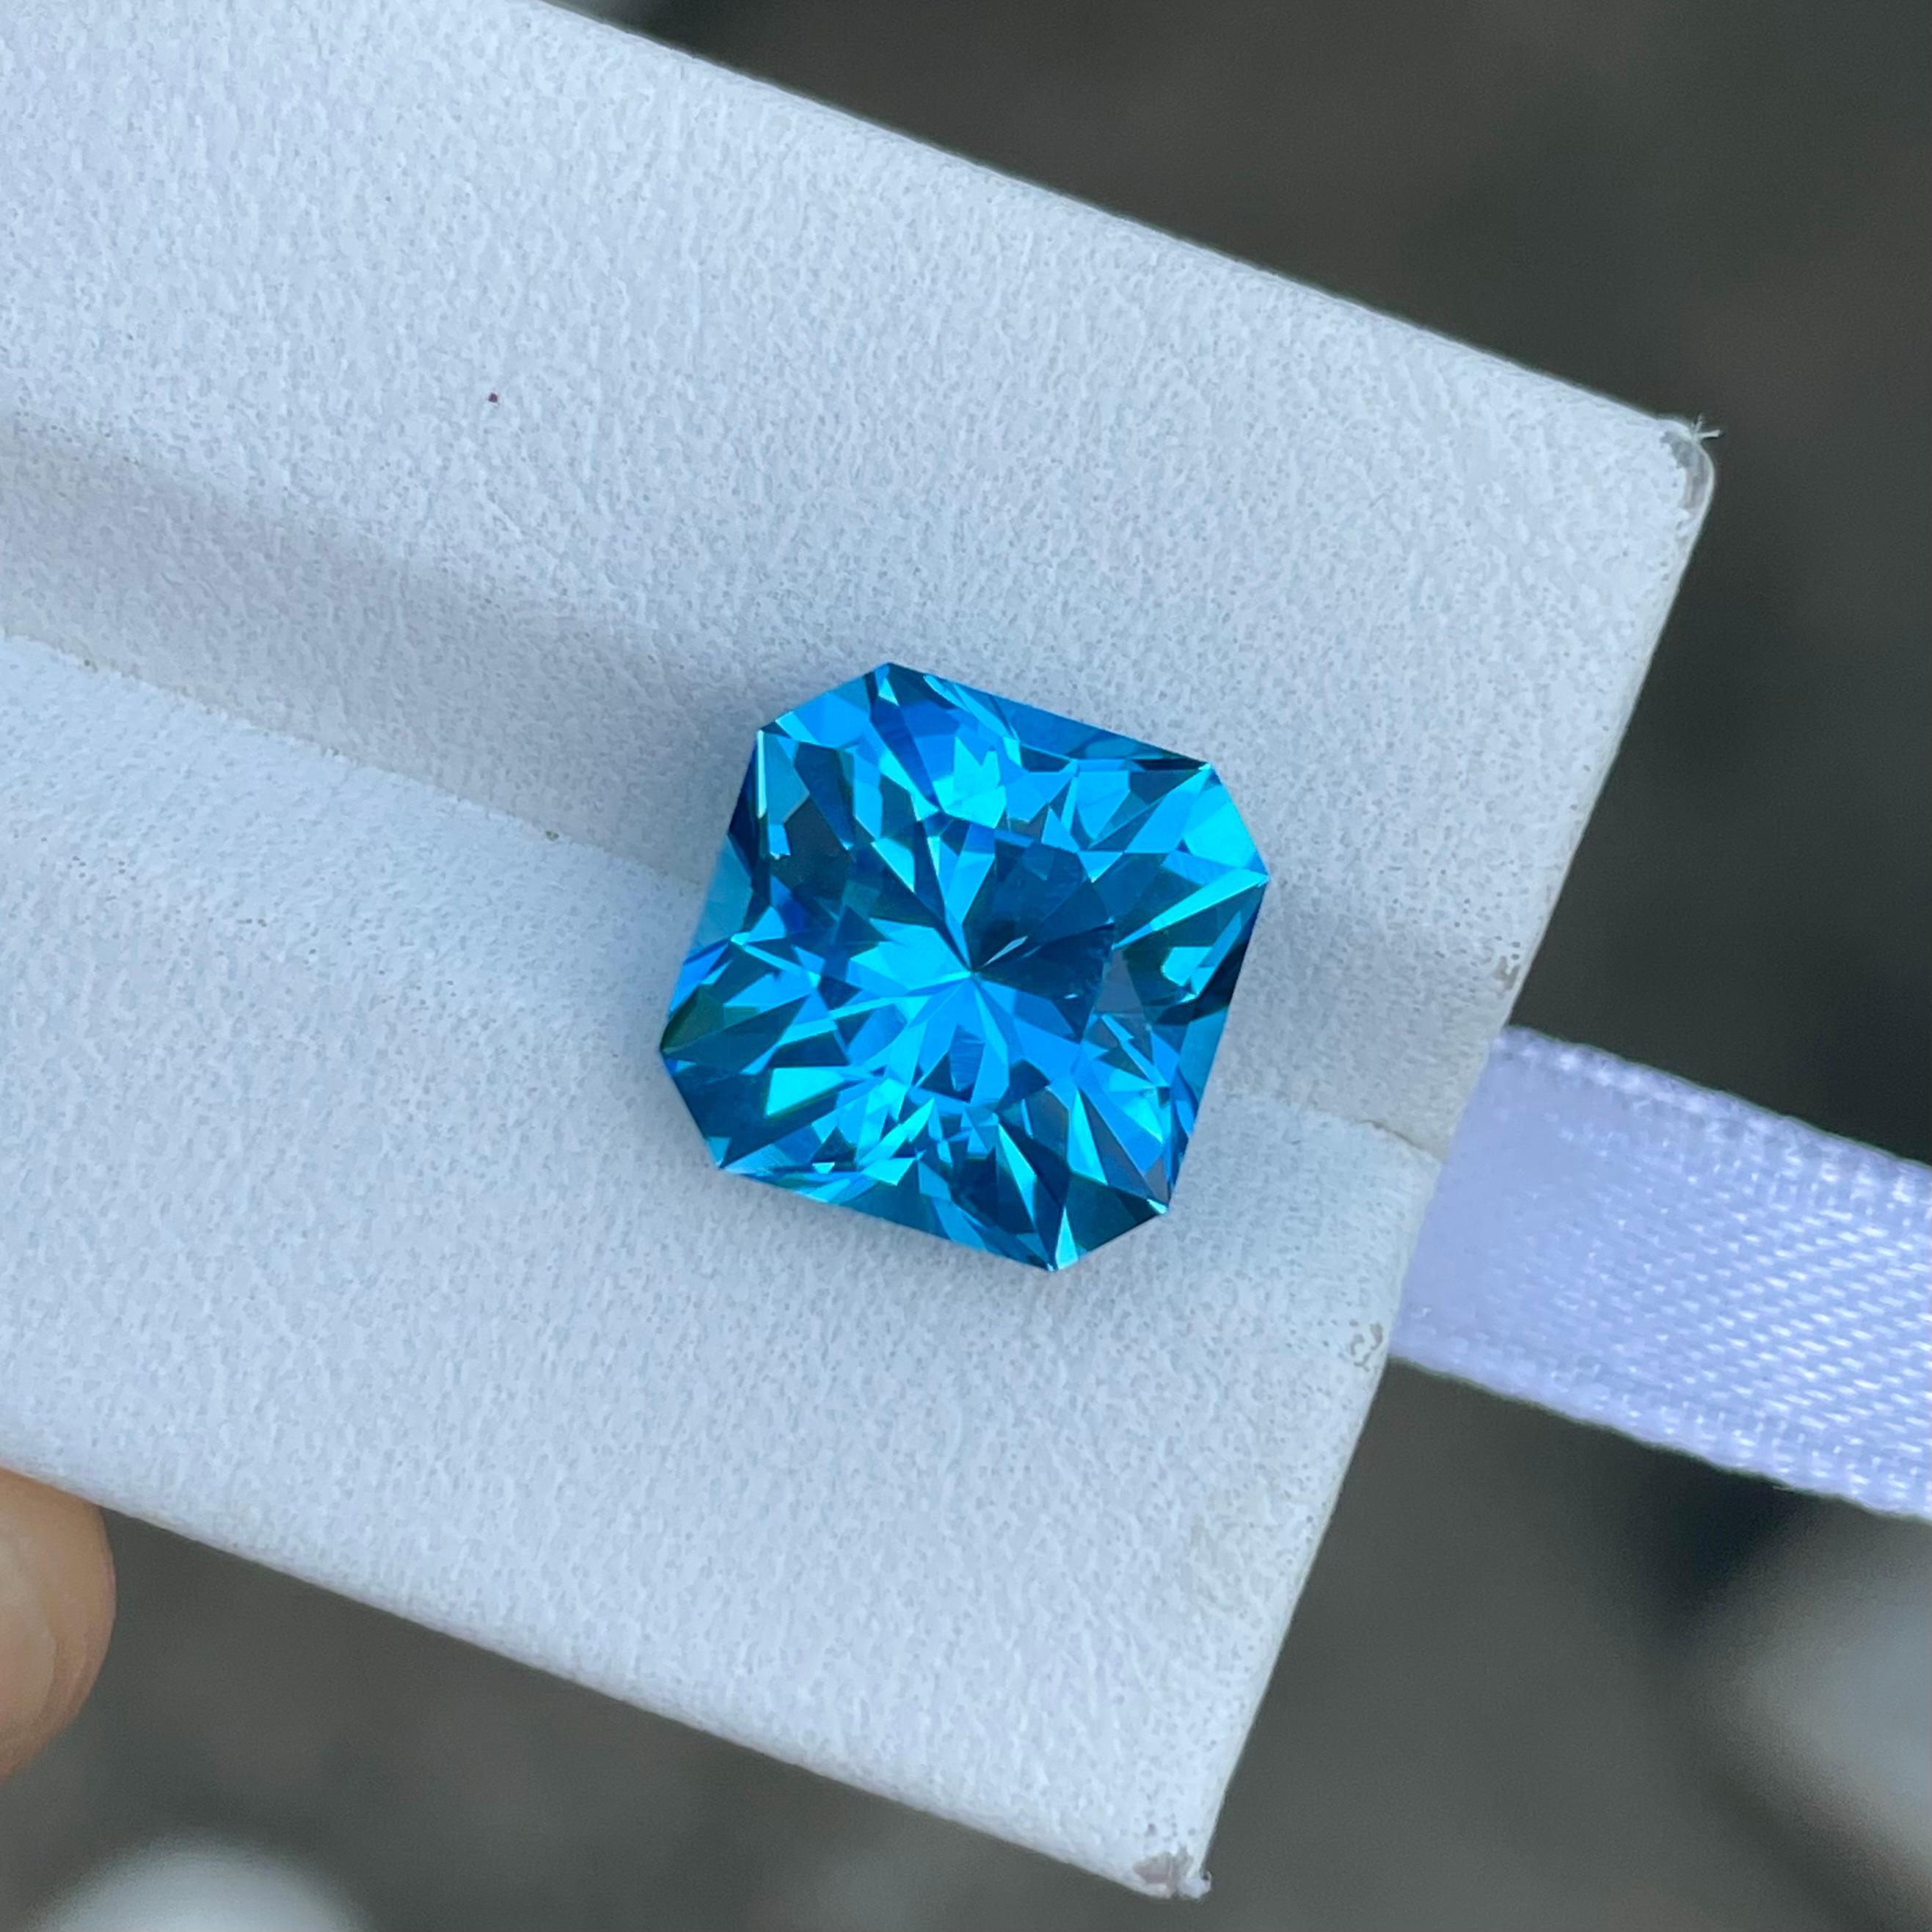 Weight 6.85 carats 
Dimensions 10.7 x 10.6 x 7.7 mm
Treatment Heated 
Origin Madagascar 
Clarity Loupe Clean 
Shape Octagon 
Cut Custom Precision



Elevate your jewelry collection with the exquisite charm of our Neon Blue Topaz. This dazzling